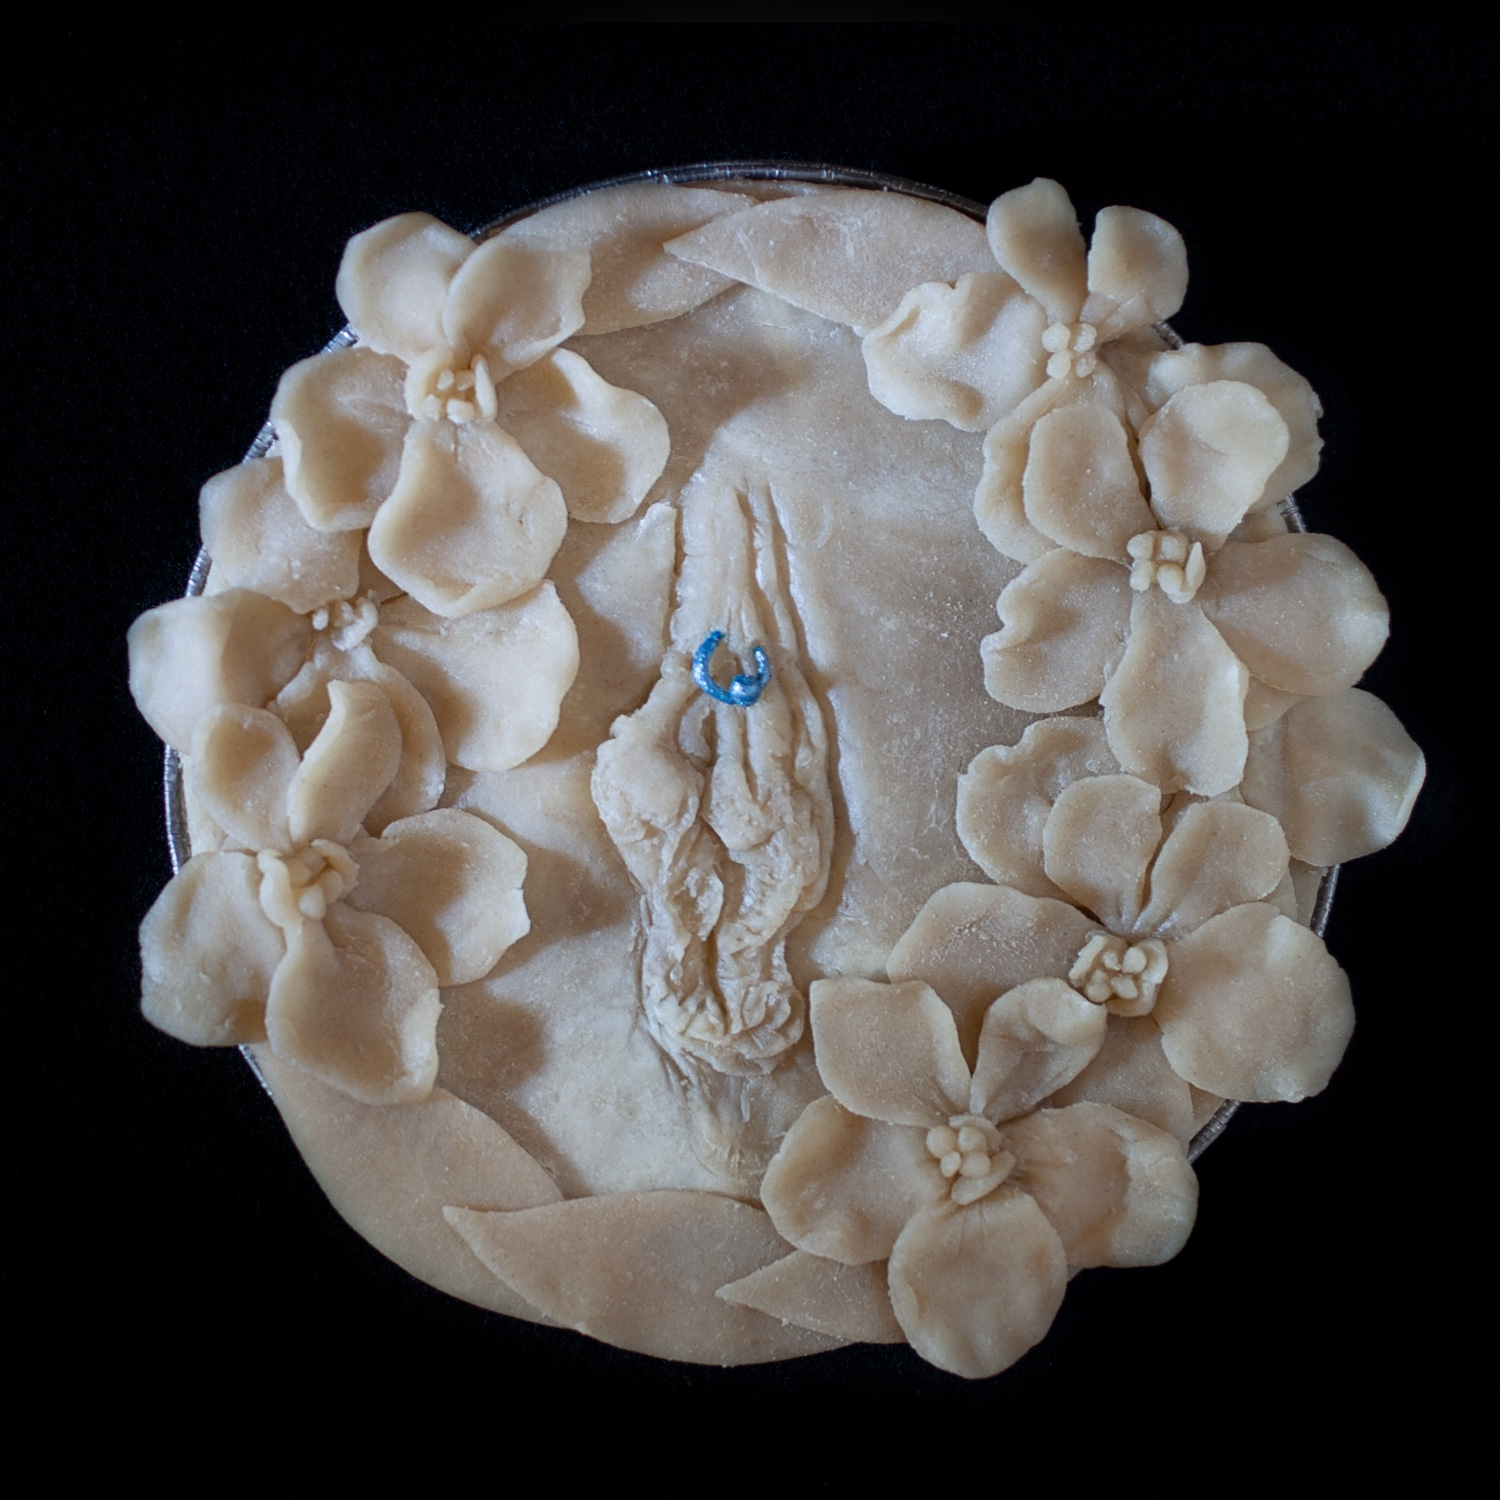 Unbaked pie on a black background. The pie crust art features a wreath of hand made violets and a pierced vulva with a blue clitoral hood piercing.